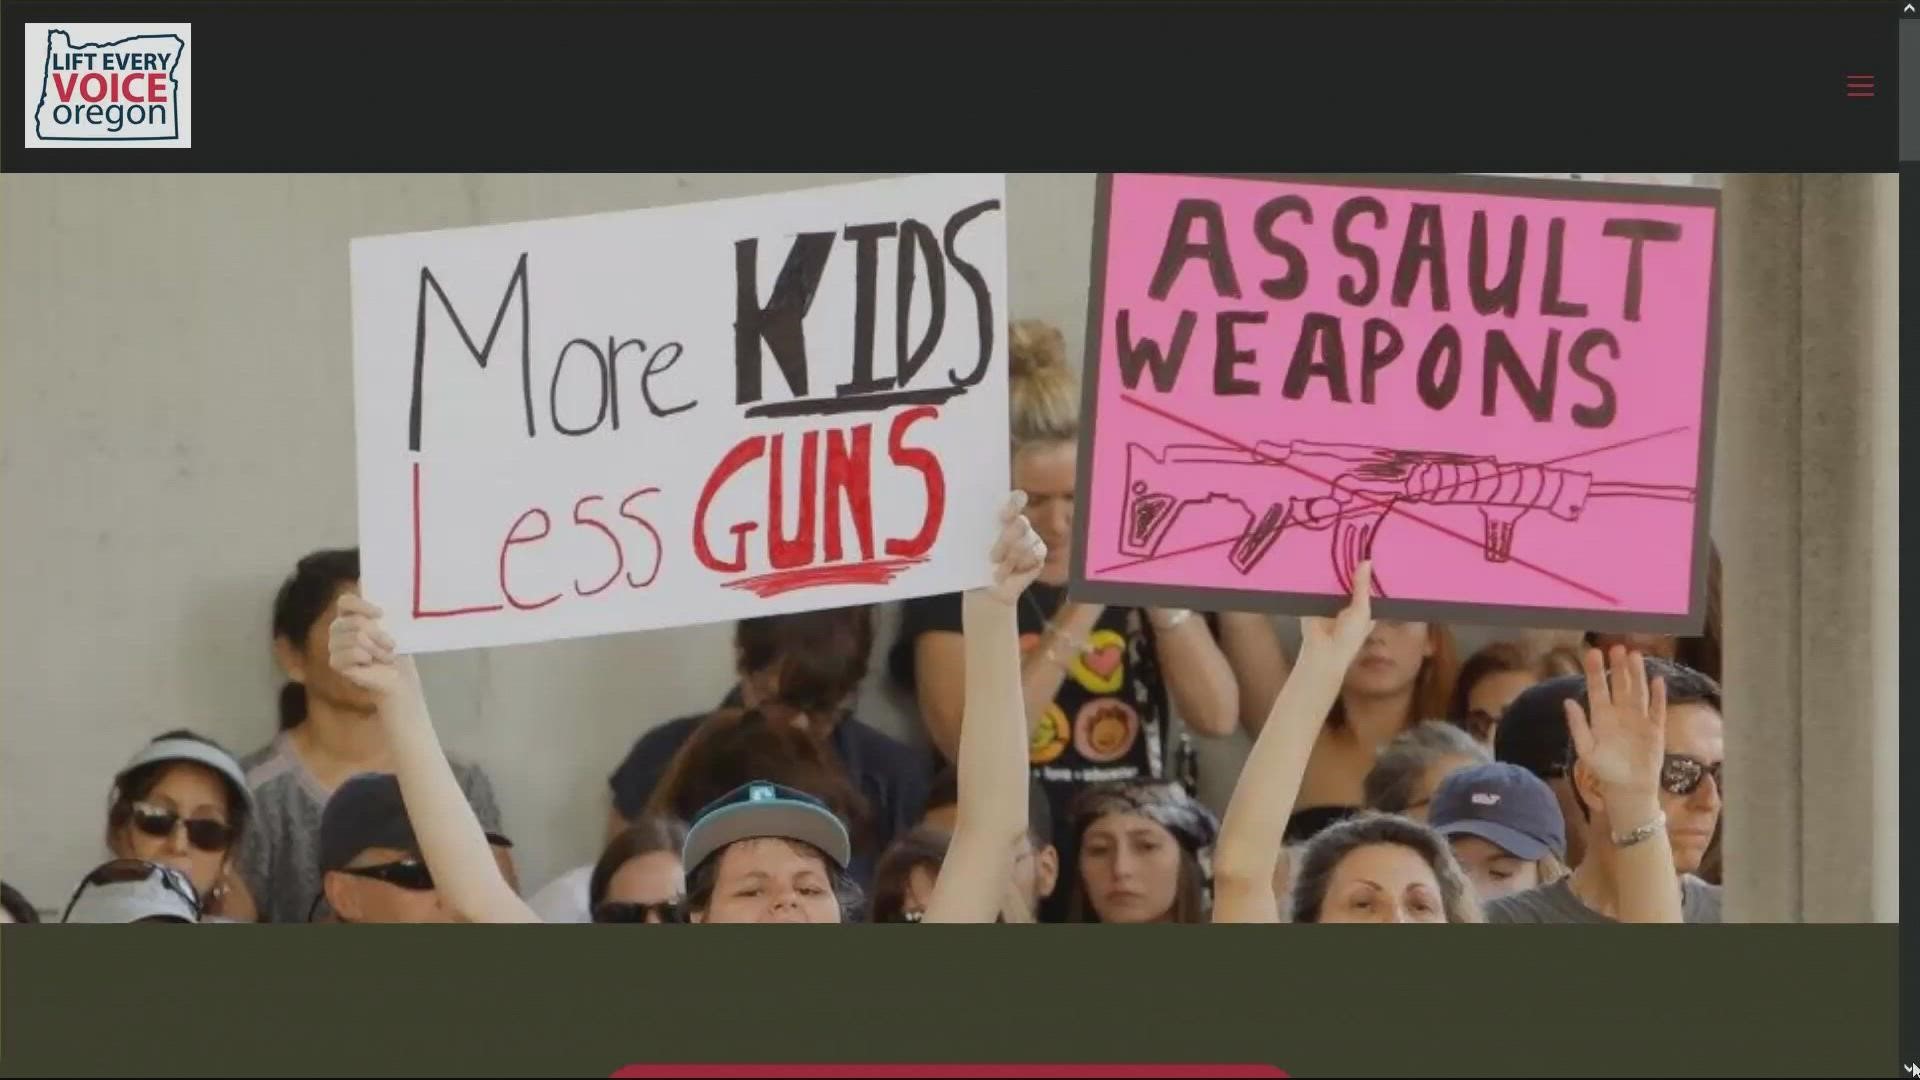 Spurred on by record gun violence, advocates are pushing for bans on assault weapons and high-capacity magazines.